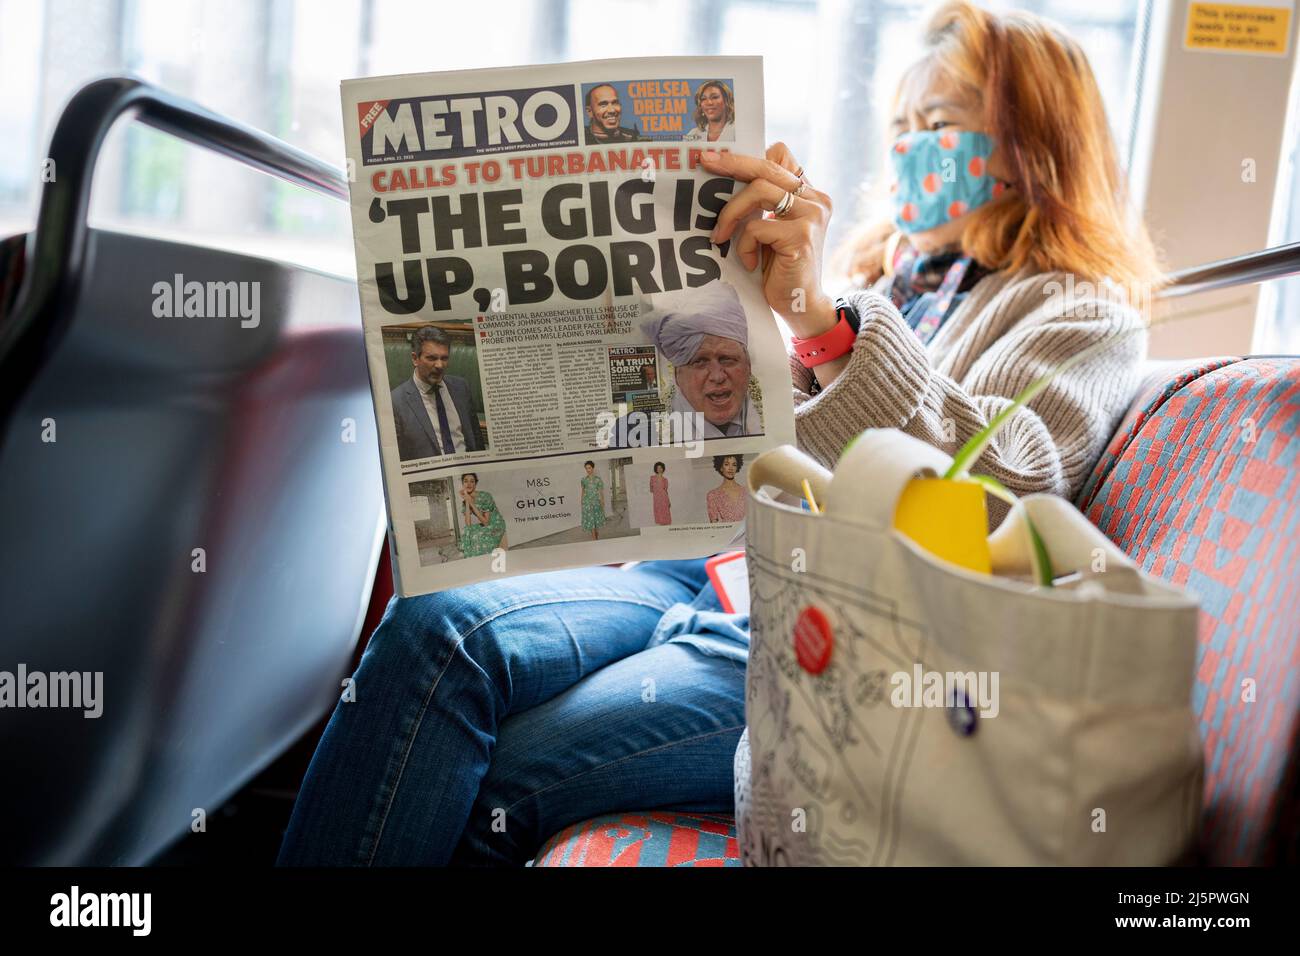 A woman bus passenger reads her copy of Metro newspaper whose front page headline is about the scandal of UK Prime Minister Boris Johnson's fine for partying during the Covid pandemic, when his own rules for gatherings were forbidden, on 22nd April 2022, in London, England. The quote 'The Gig Is Up, Boris' refers to Conservative MP Steve Baker in parliament, telling Johnson (currently in India) that he should resign. More Fixed-Penalty fines for illegal parties in volving Johnson in Downing Street are expected to be issued by the Met police. Stock Photo